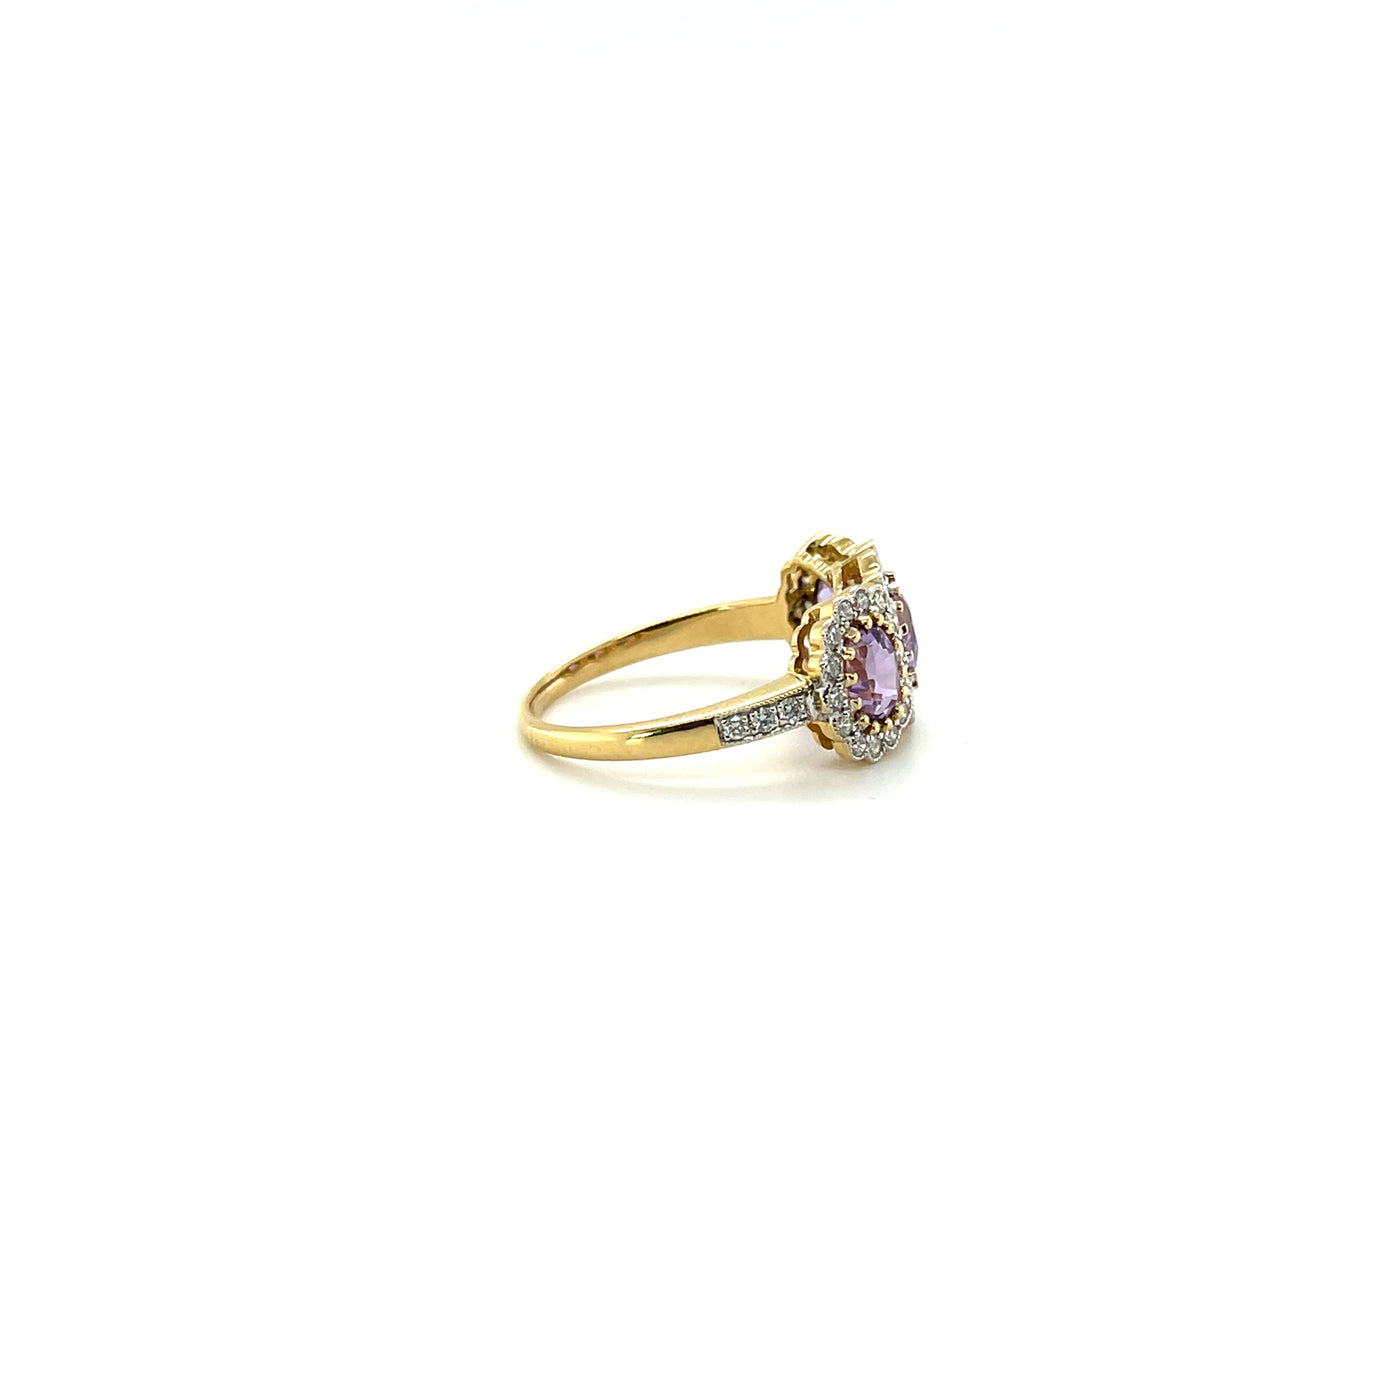 18ct yellow gold trilogy sapphire and diamond ring